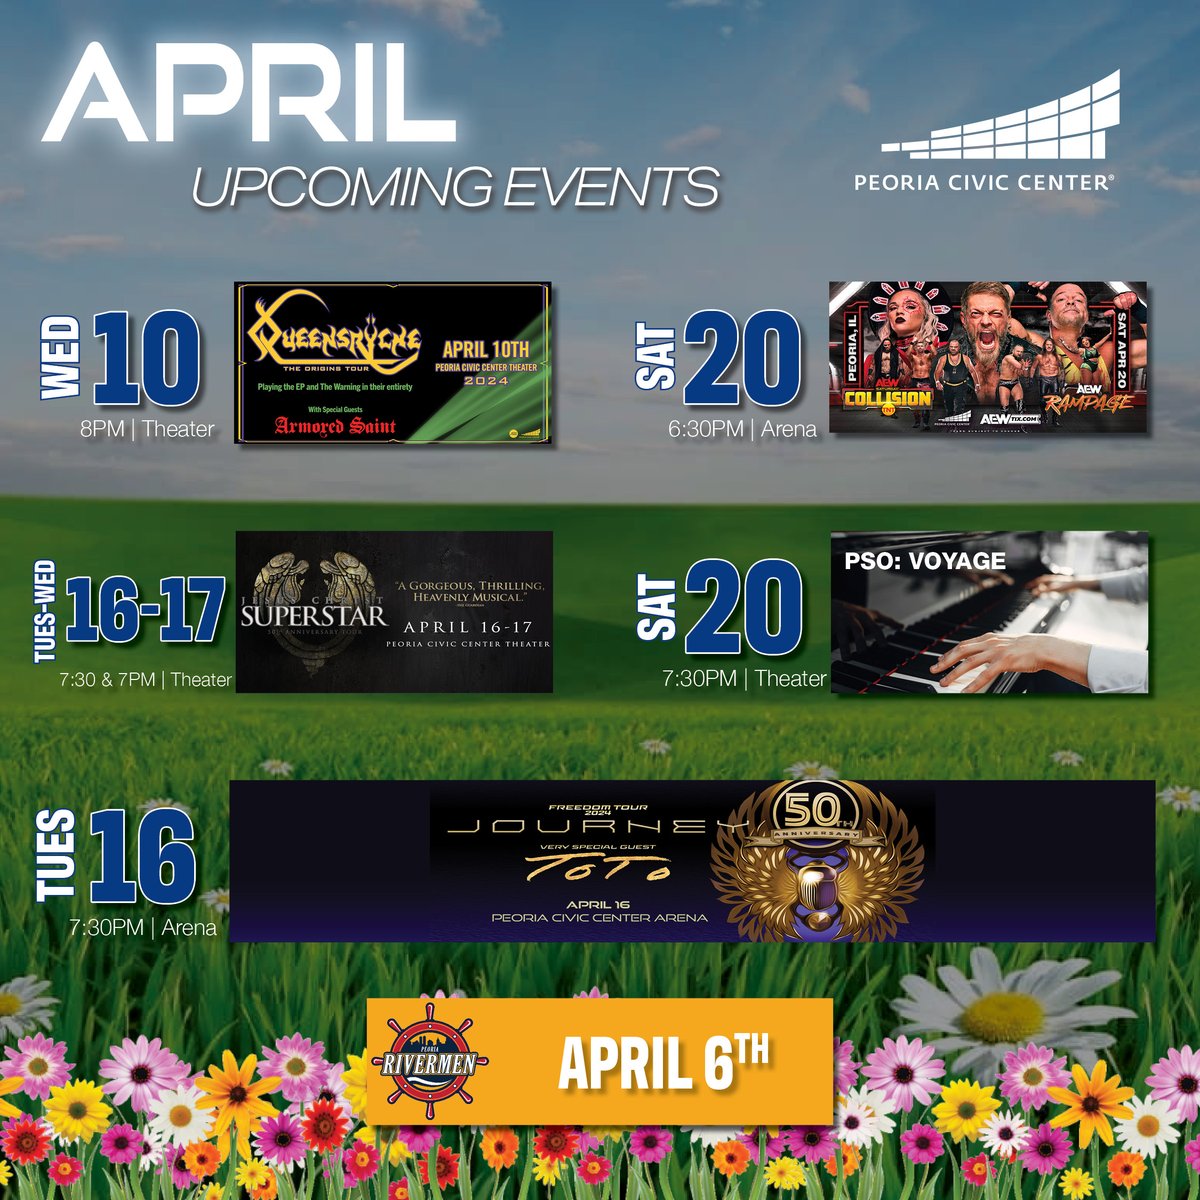 🌸SPRING into our April events!🌸 Get your ticket NOW! peoriaciviccenter.com/events #PlaysinPeoria #ASMGlobal #peoriaciviccenter #peoriaciviccentertheater #aprilschedule